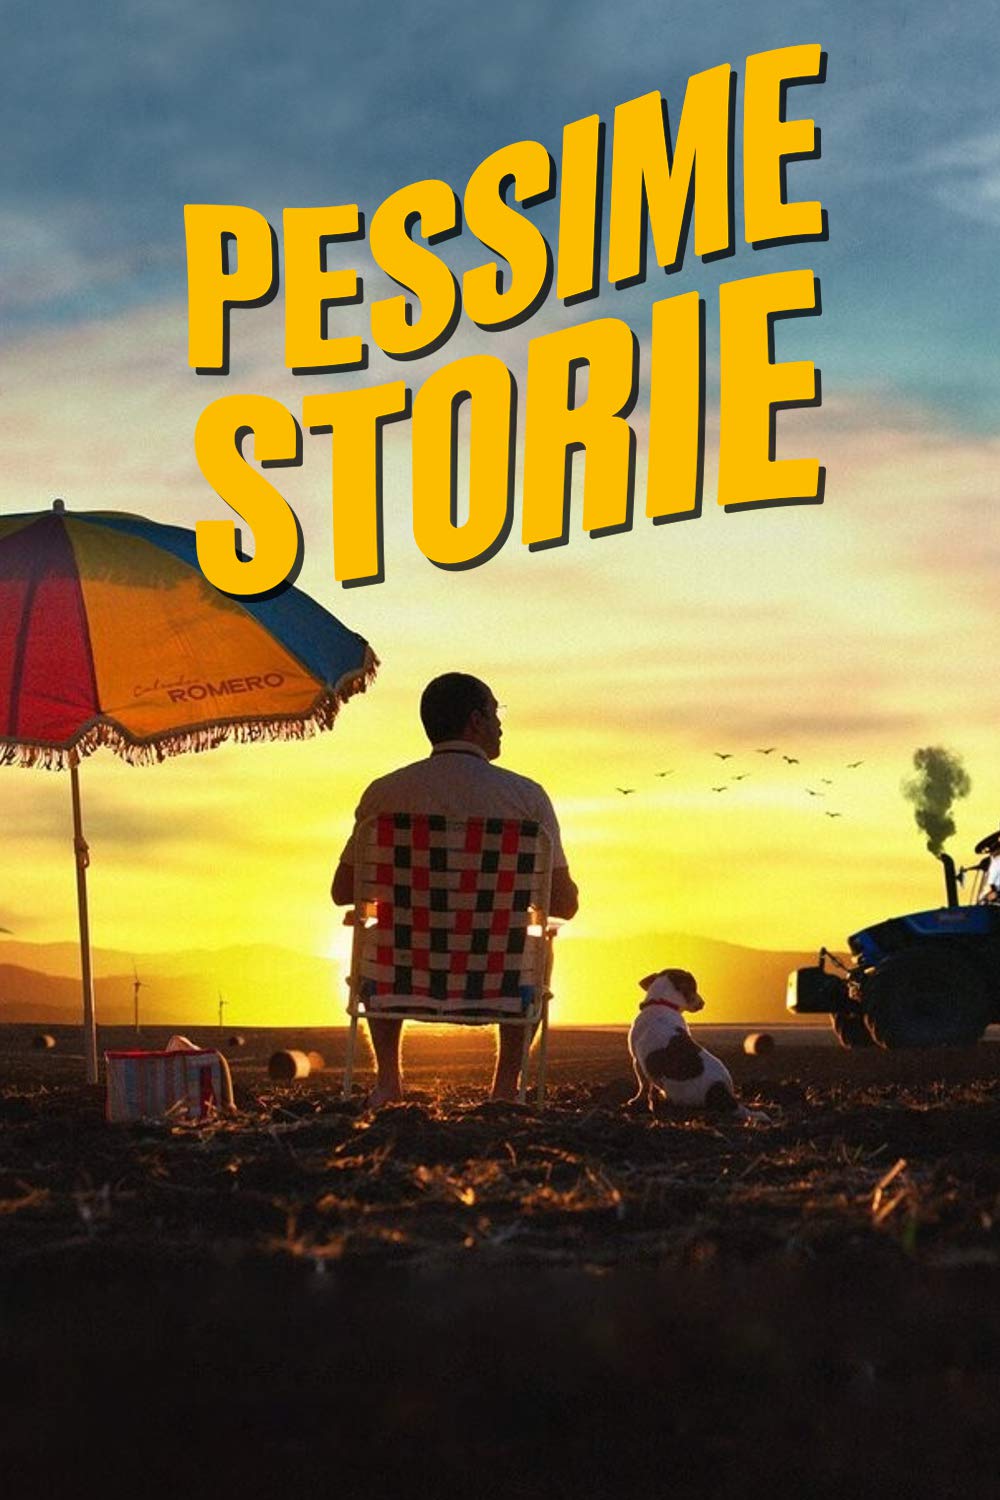 Pessime storie [HD] (2020)